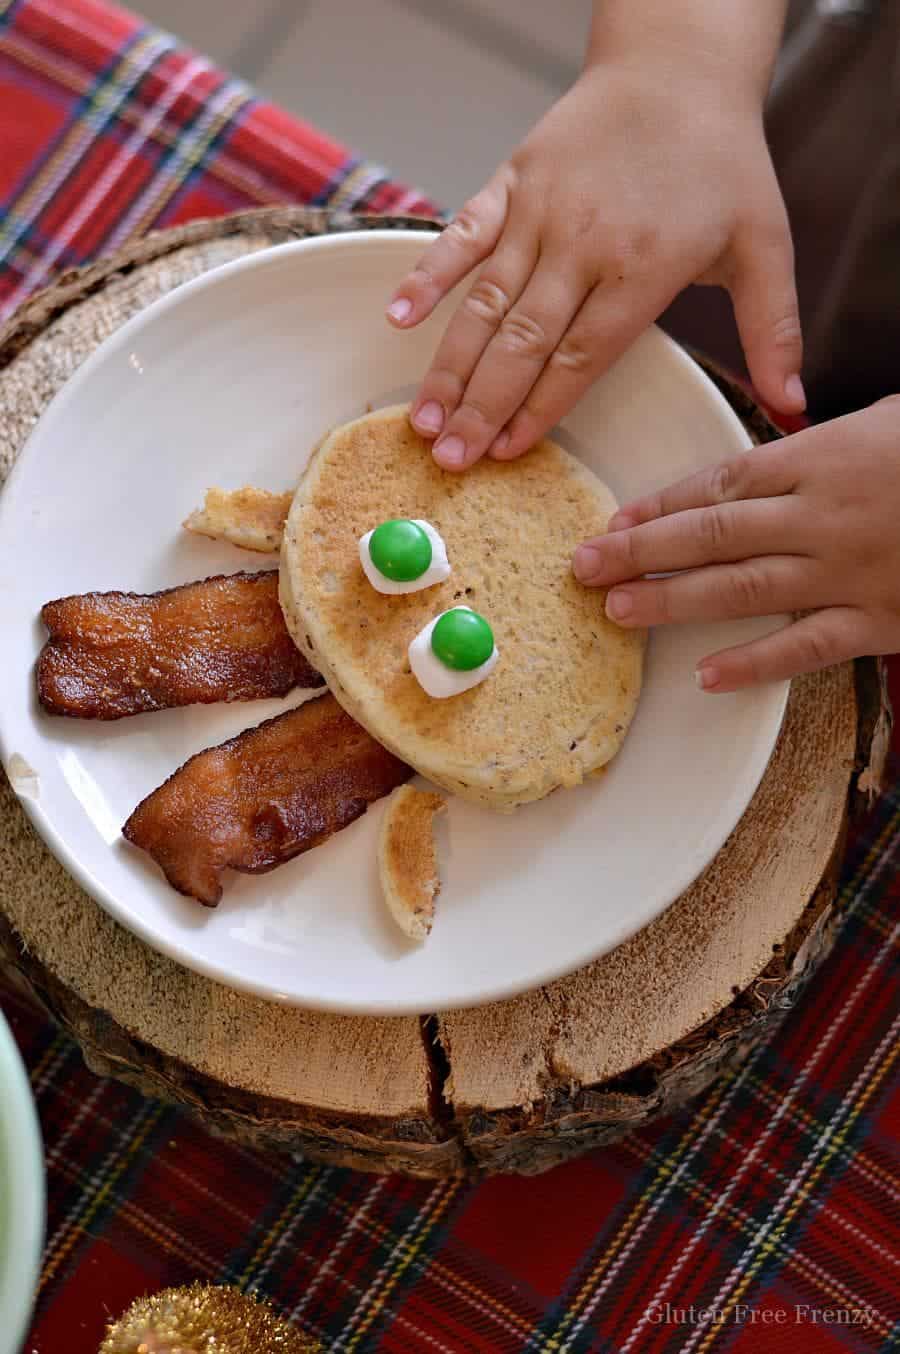 This gluten-free mini reindeer pancake party is both whimsical and tasty. Kids will love how tiny and tasty everything is at this holiday breakfast.